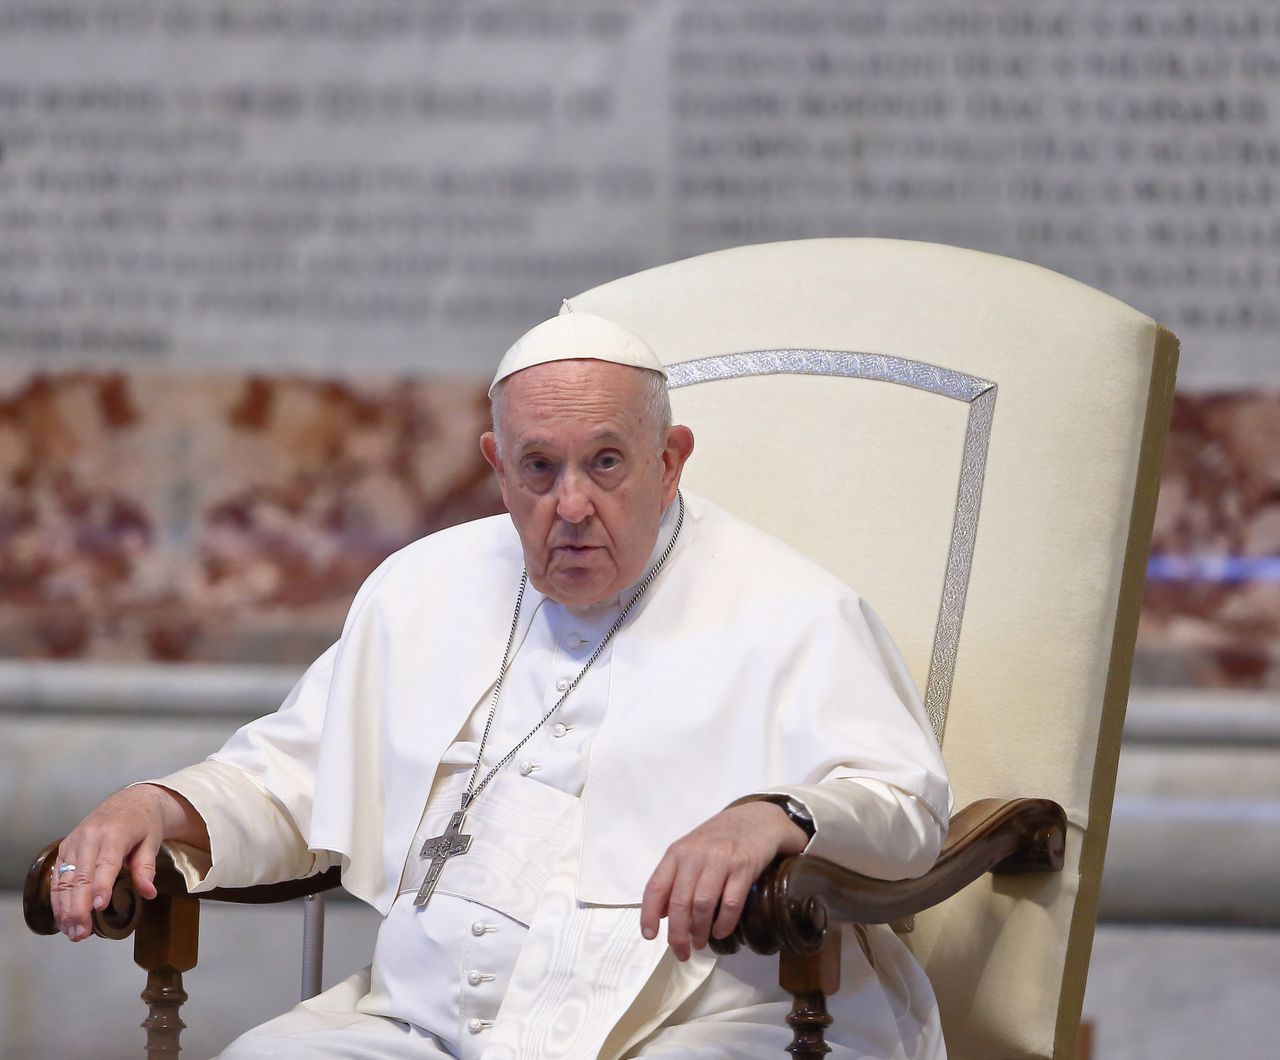 Pope Francis advocates for negotiated peace over endless war